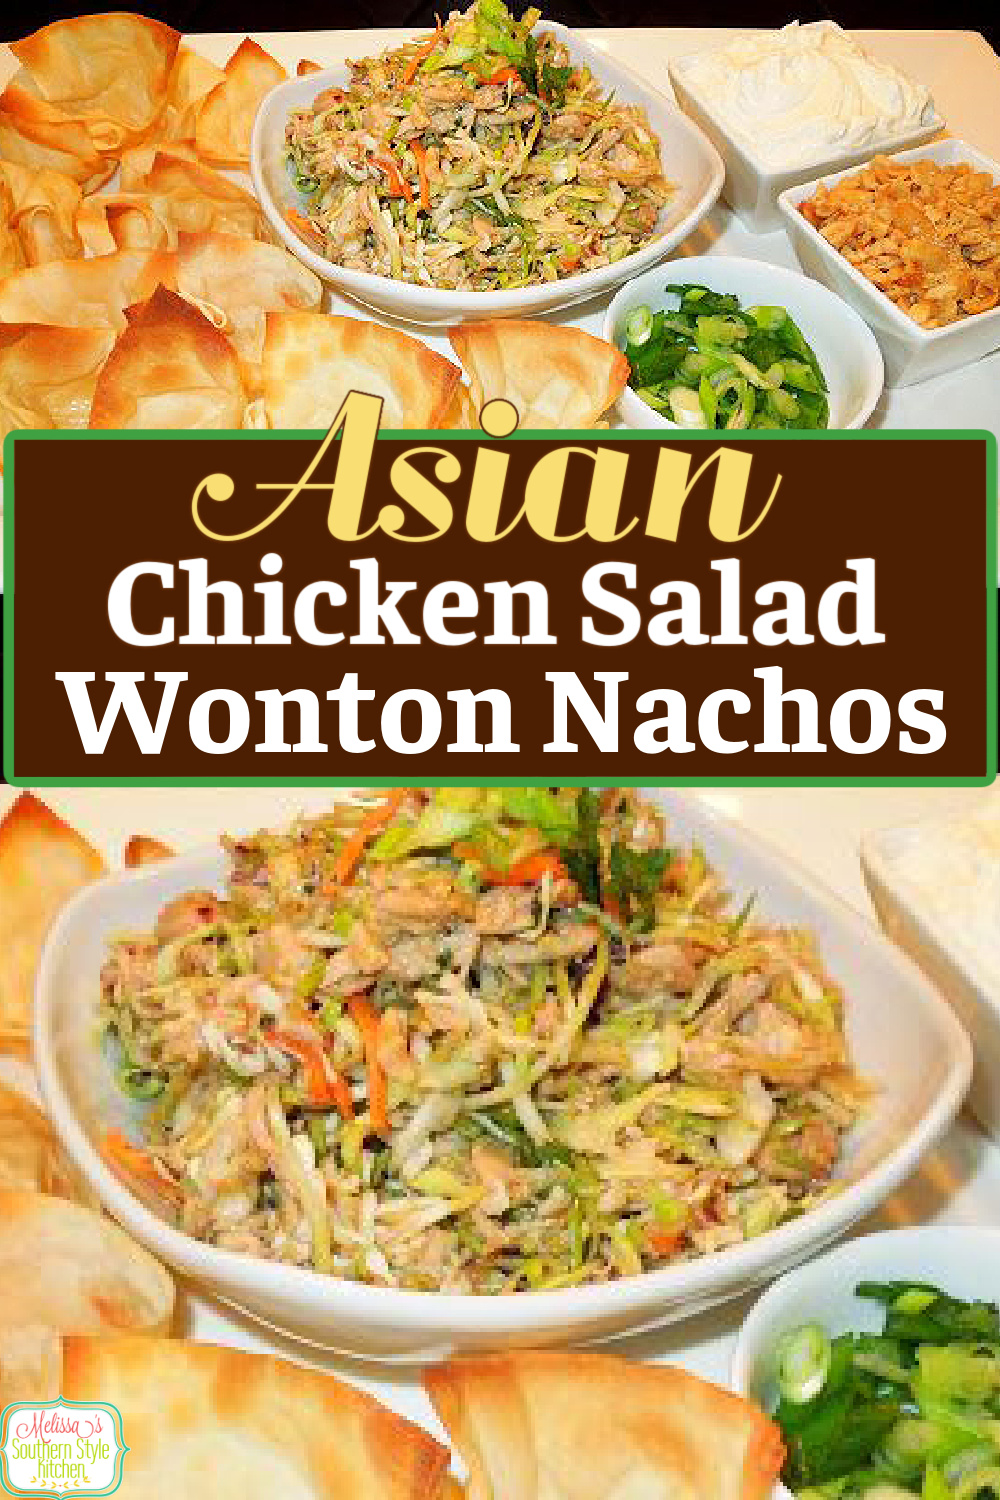 These Asian Chicken Salad Wonton Nachos are lighter and full flavored for a delicious departure from the norm for your appetizer menu #asianchicken #asianchickensalad #wontonnachos #nachos #wontons #chickensaladrecipes #easychickenrecipes via @melissasssk